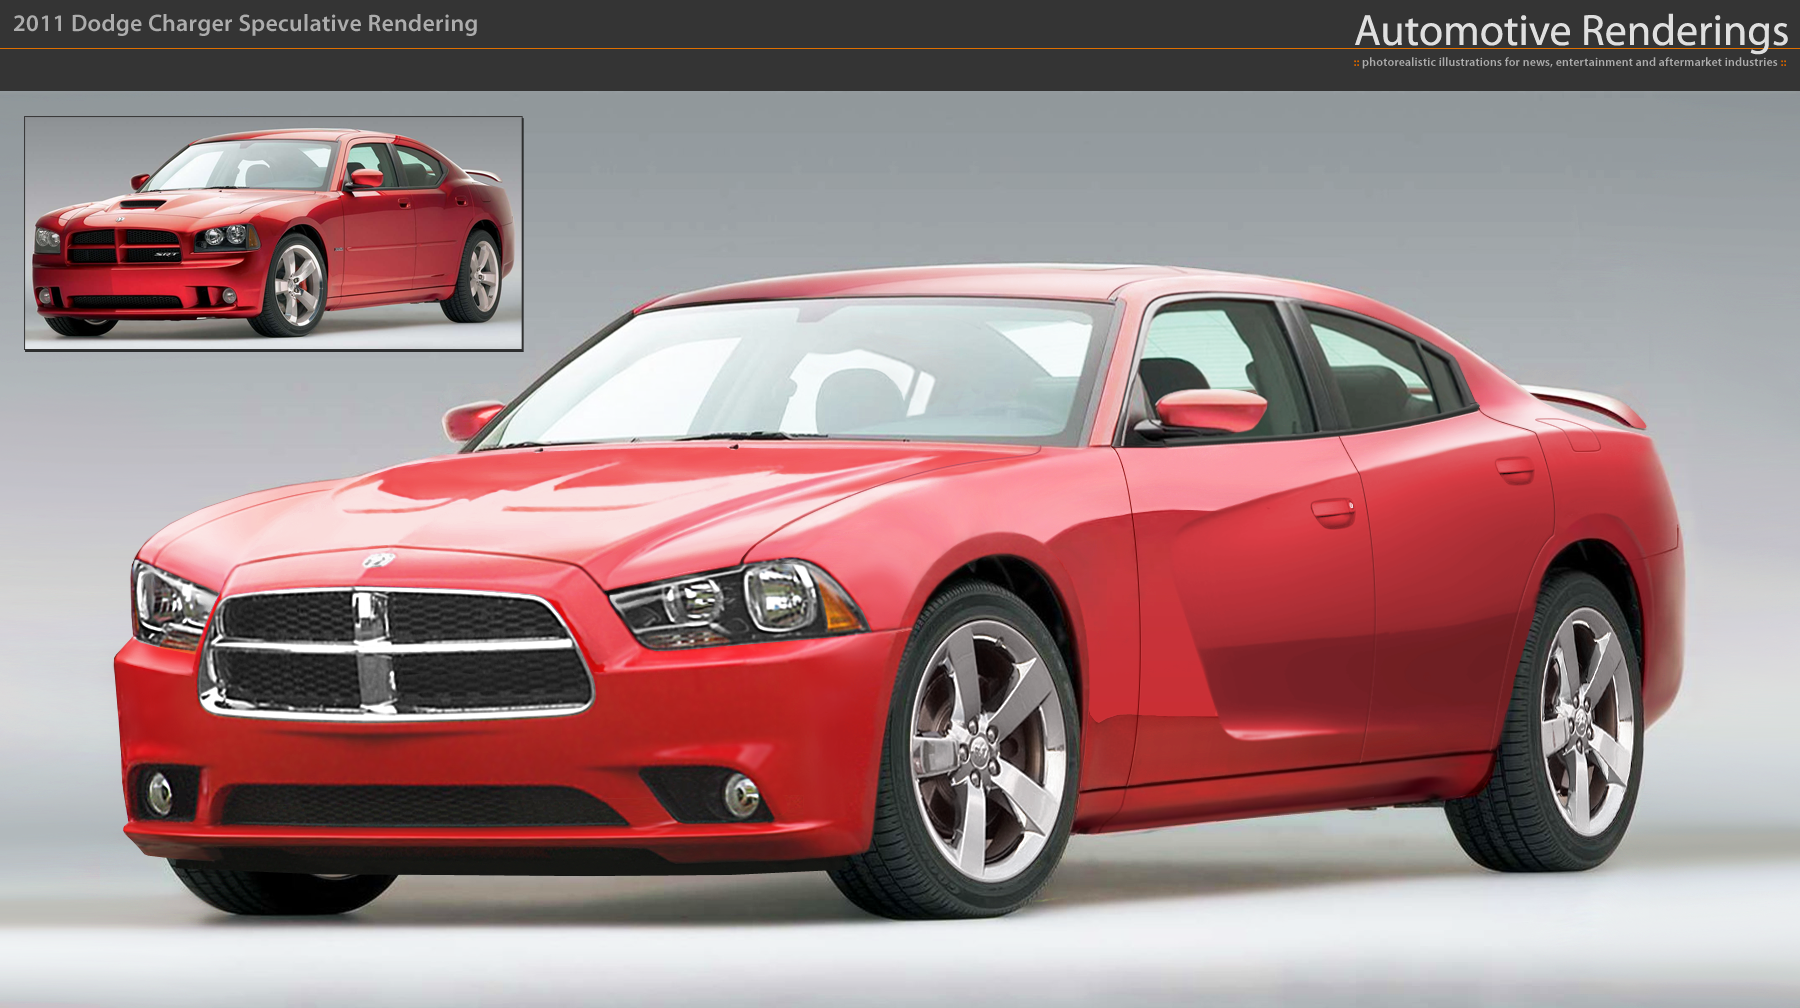 2011_Dodge_Charger_Speculative_Rendering_by_chopperx.png